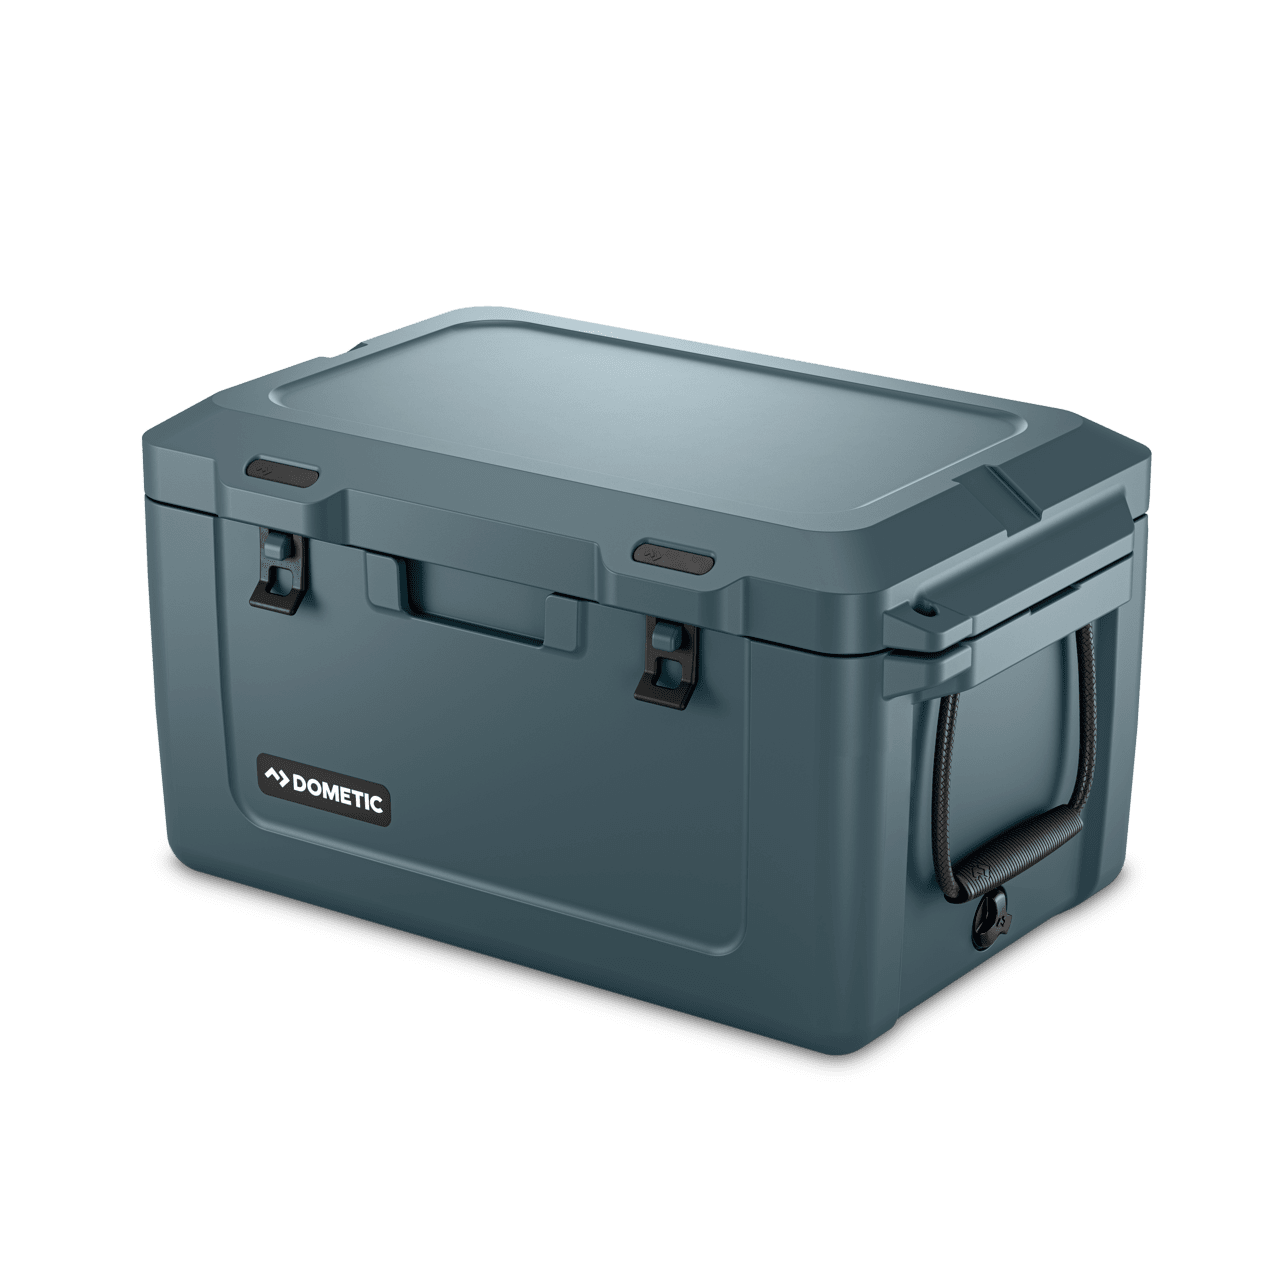 Dometic Patrol 55 Insulated ice chest, 54.3 l $199.99